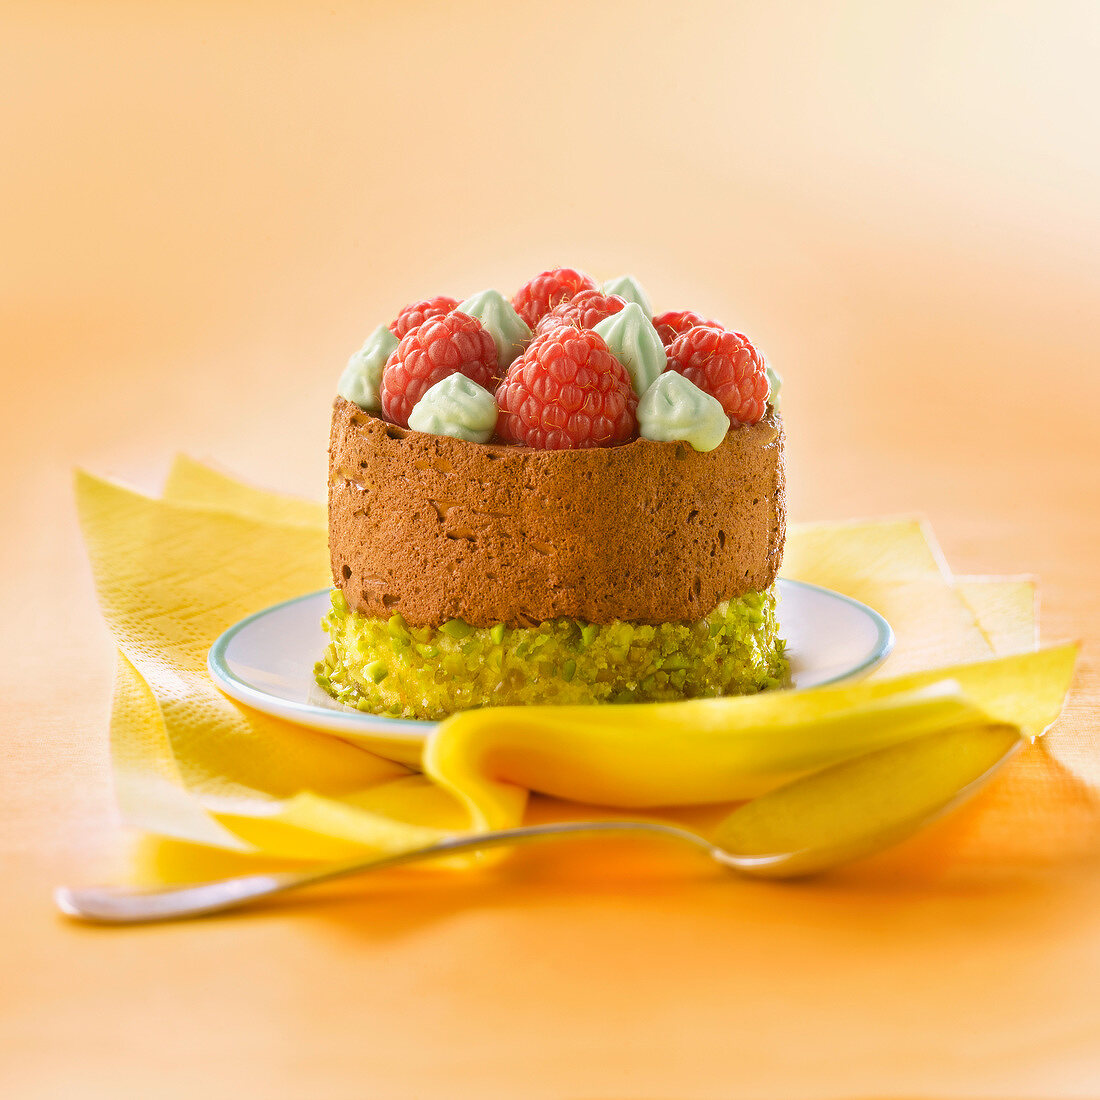 Pistachio and chocolate mousse cake topped with raspberries and pistachio whipped cream